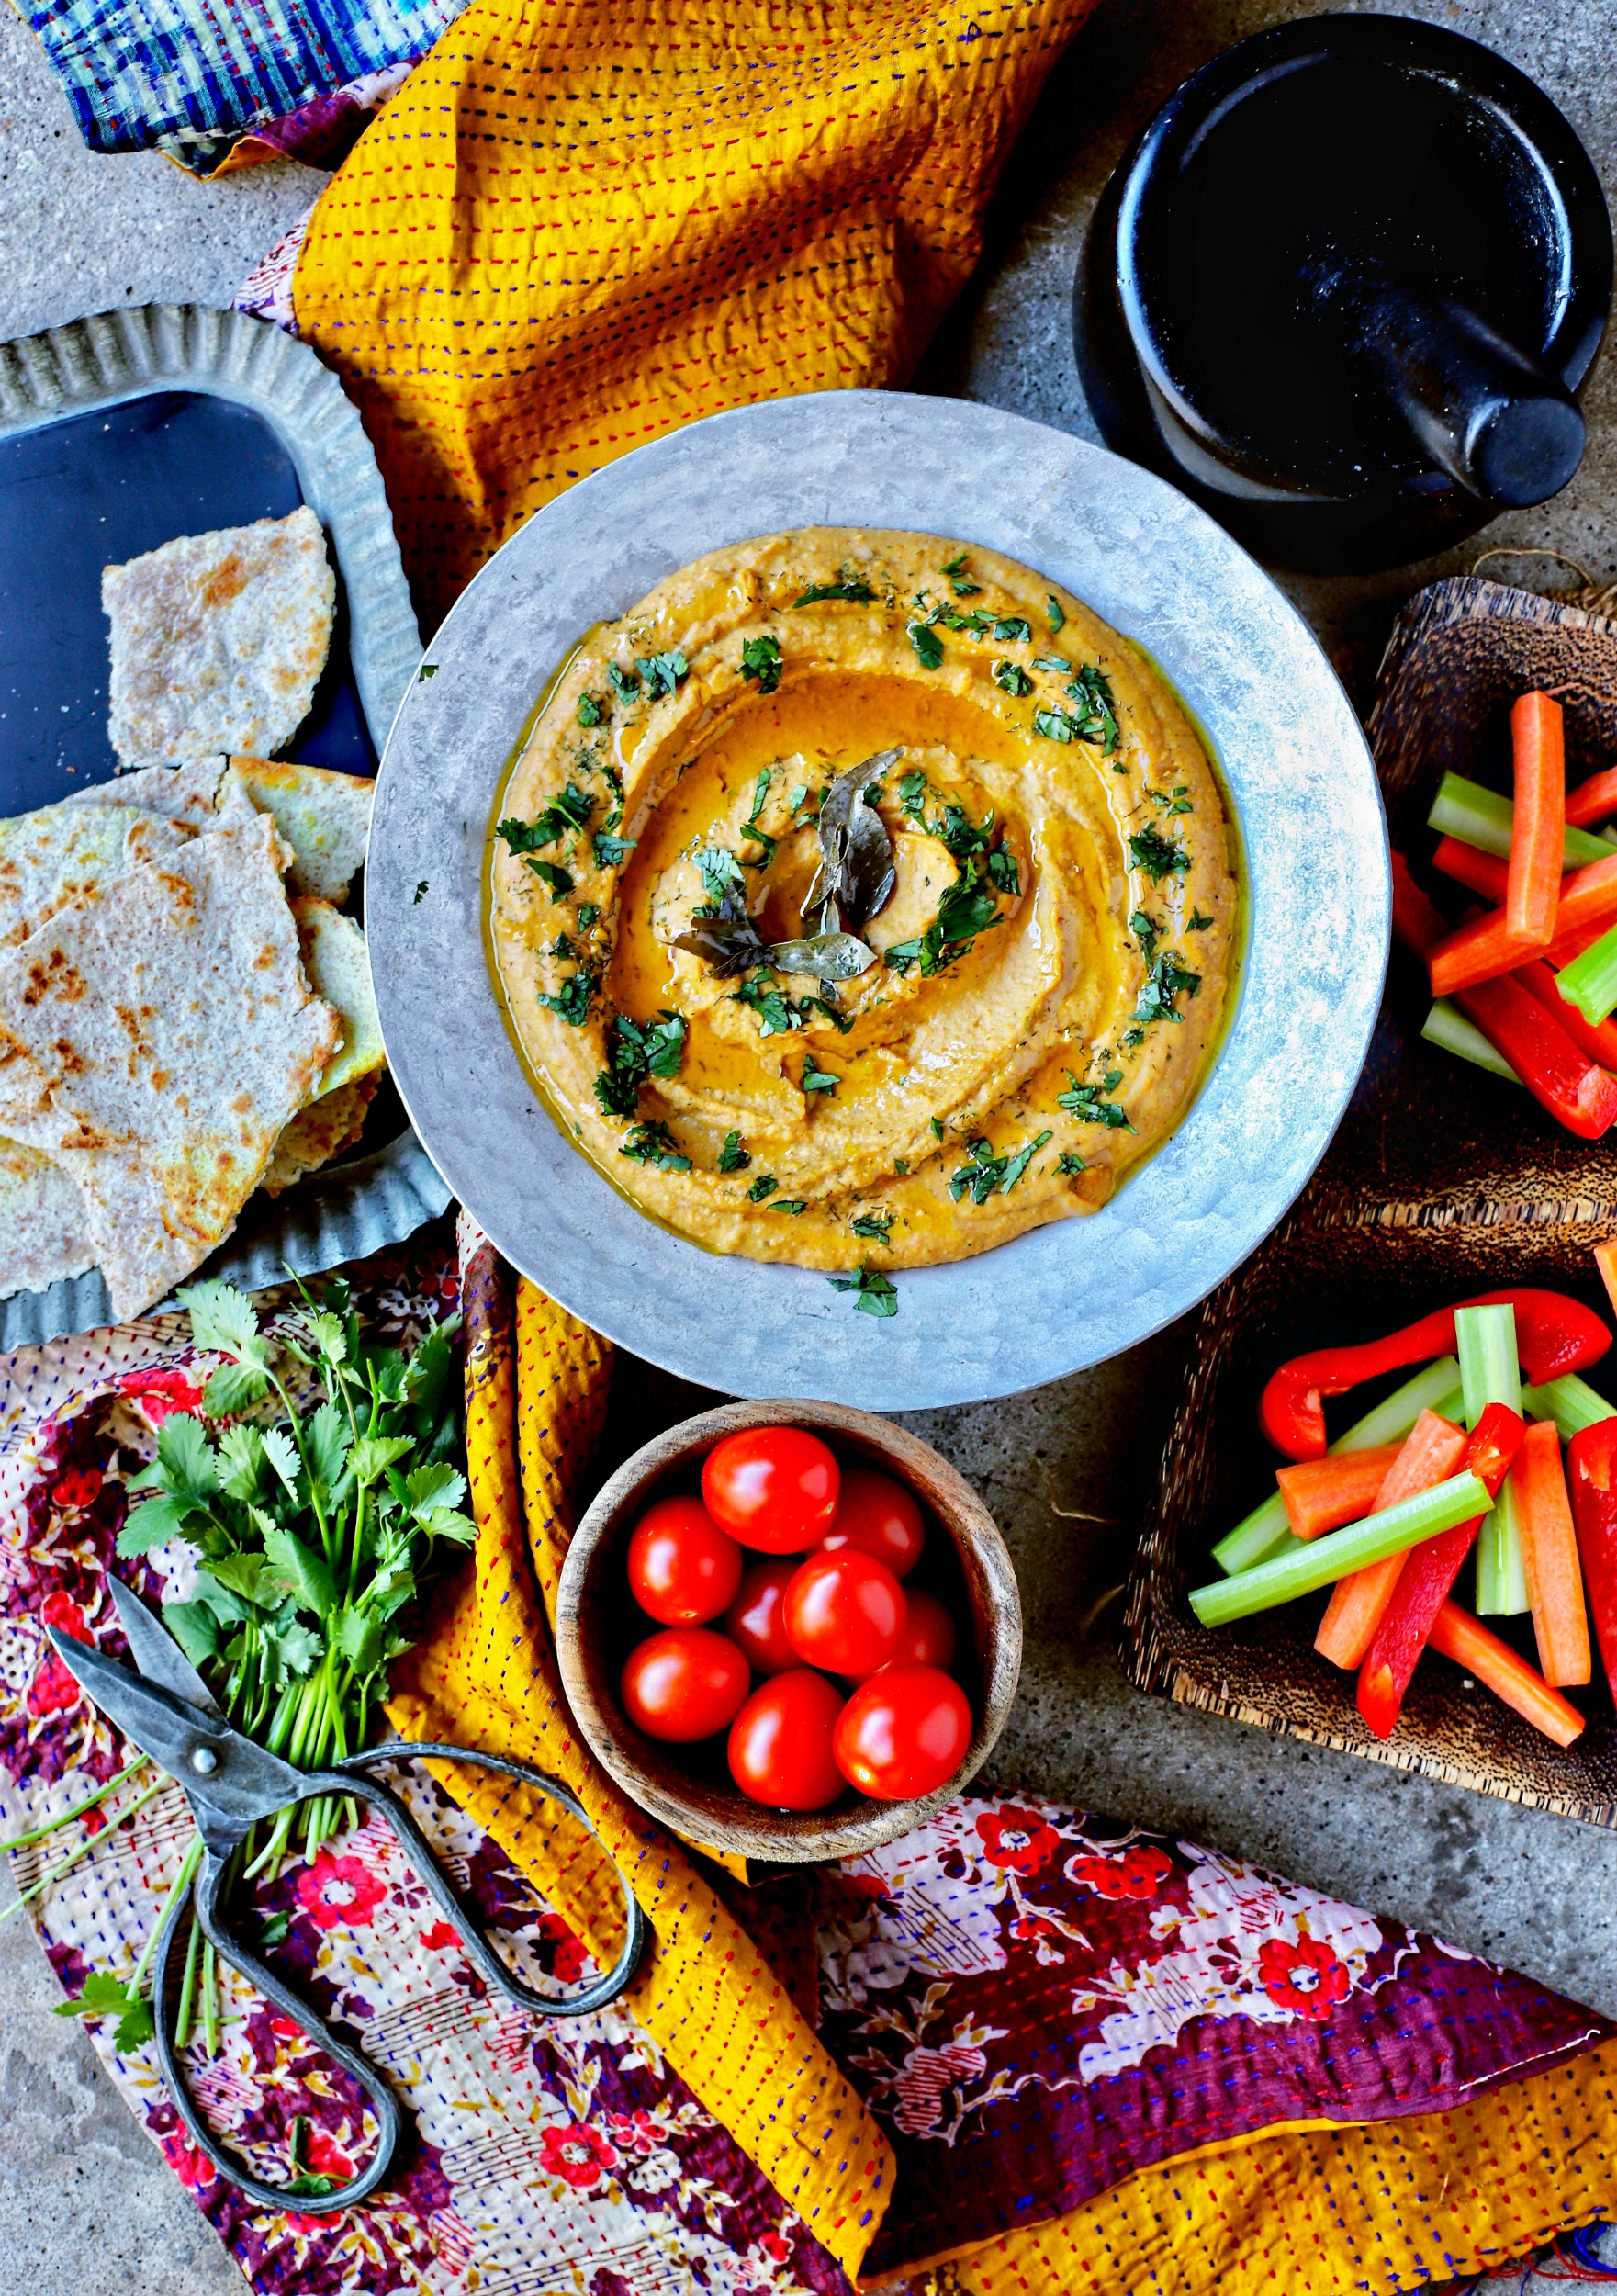 Spice up your hummus game with Indian spices and lentils to make dal hummus. A most perfect dip and spread for healthy, vegan, snacks and lunches. Spread this dip on wraps or use it to plunge in fresh vegetables and bread.